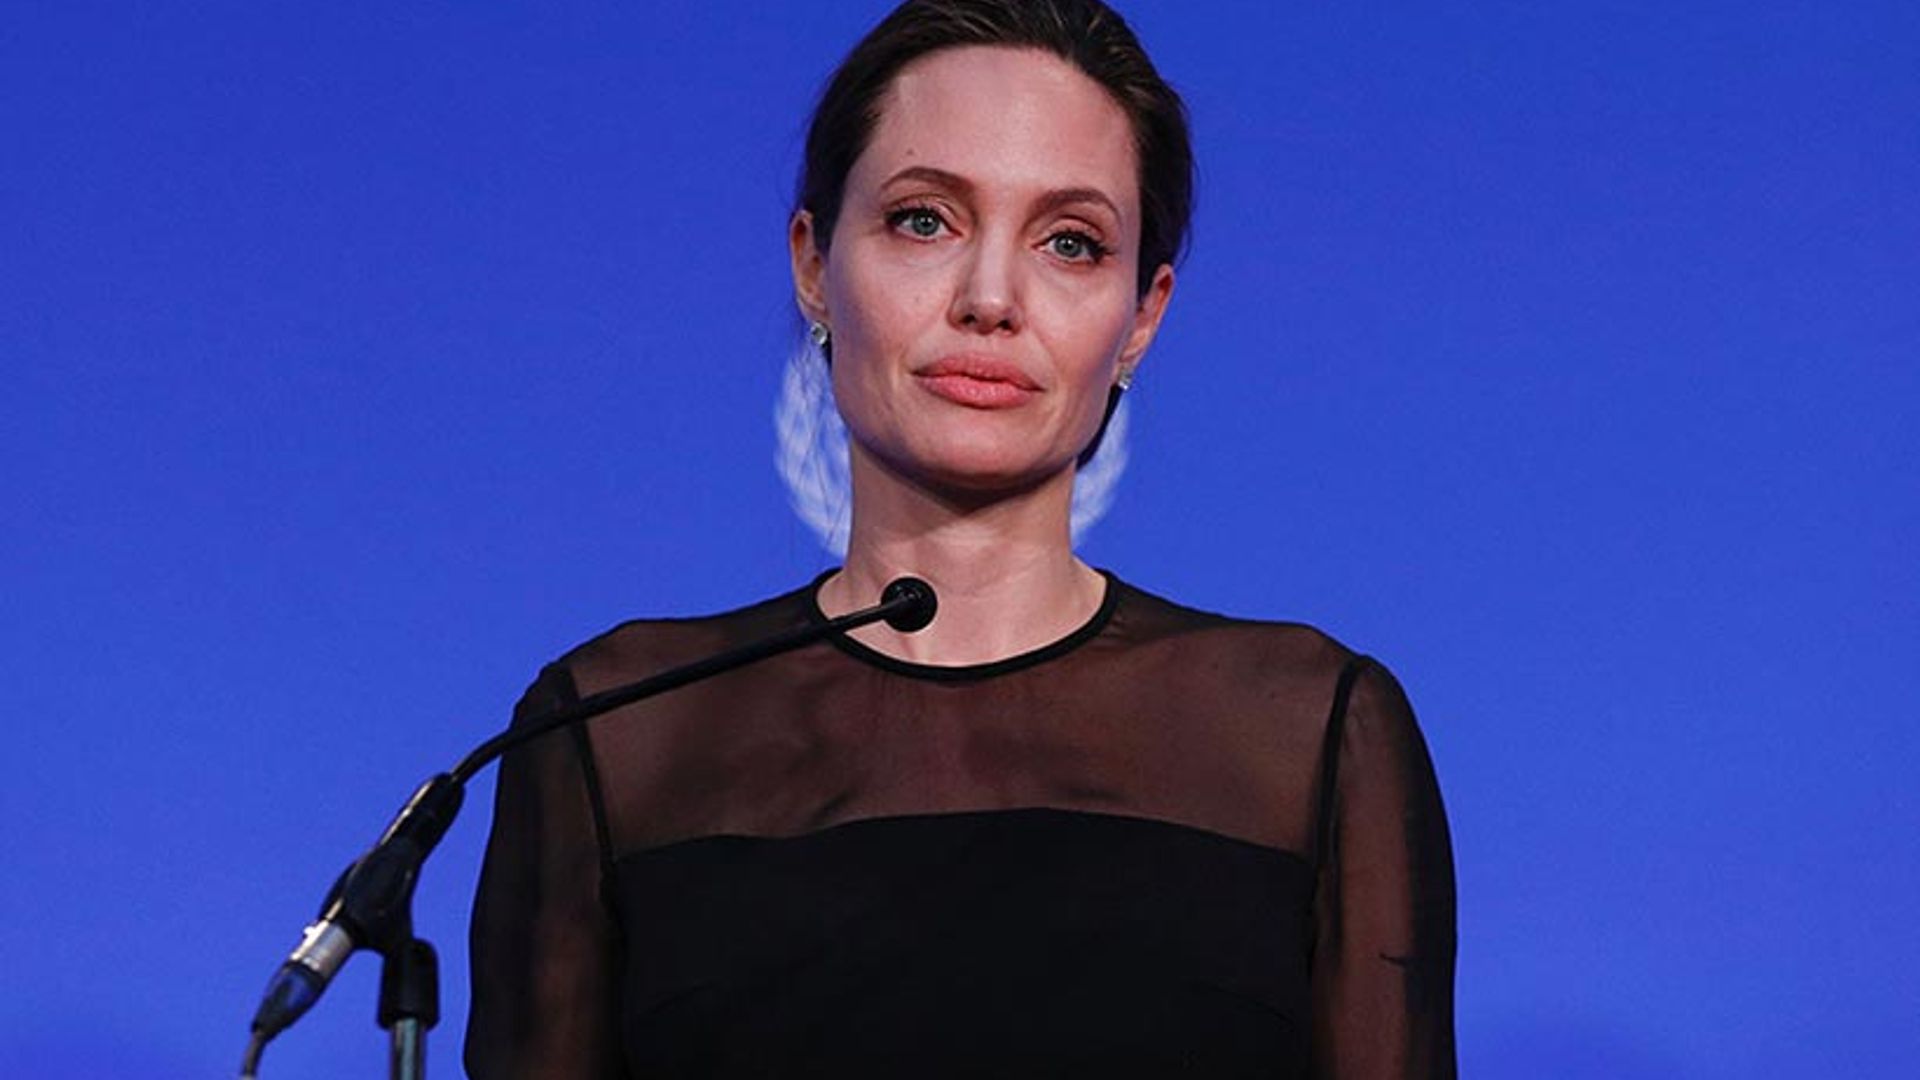 Angelina Jolie pens powerful essay on refugees in response to Donald Trump's immigration ban